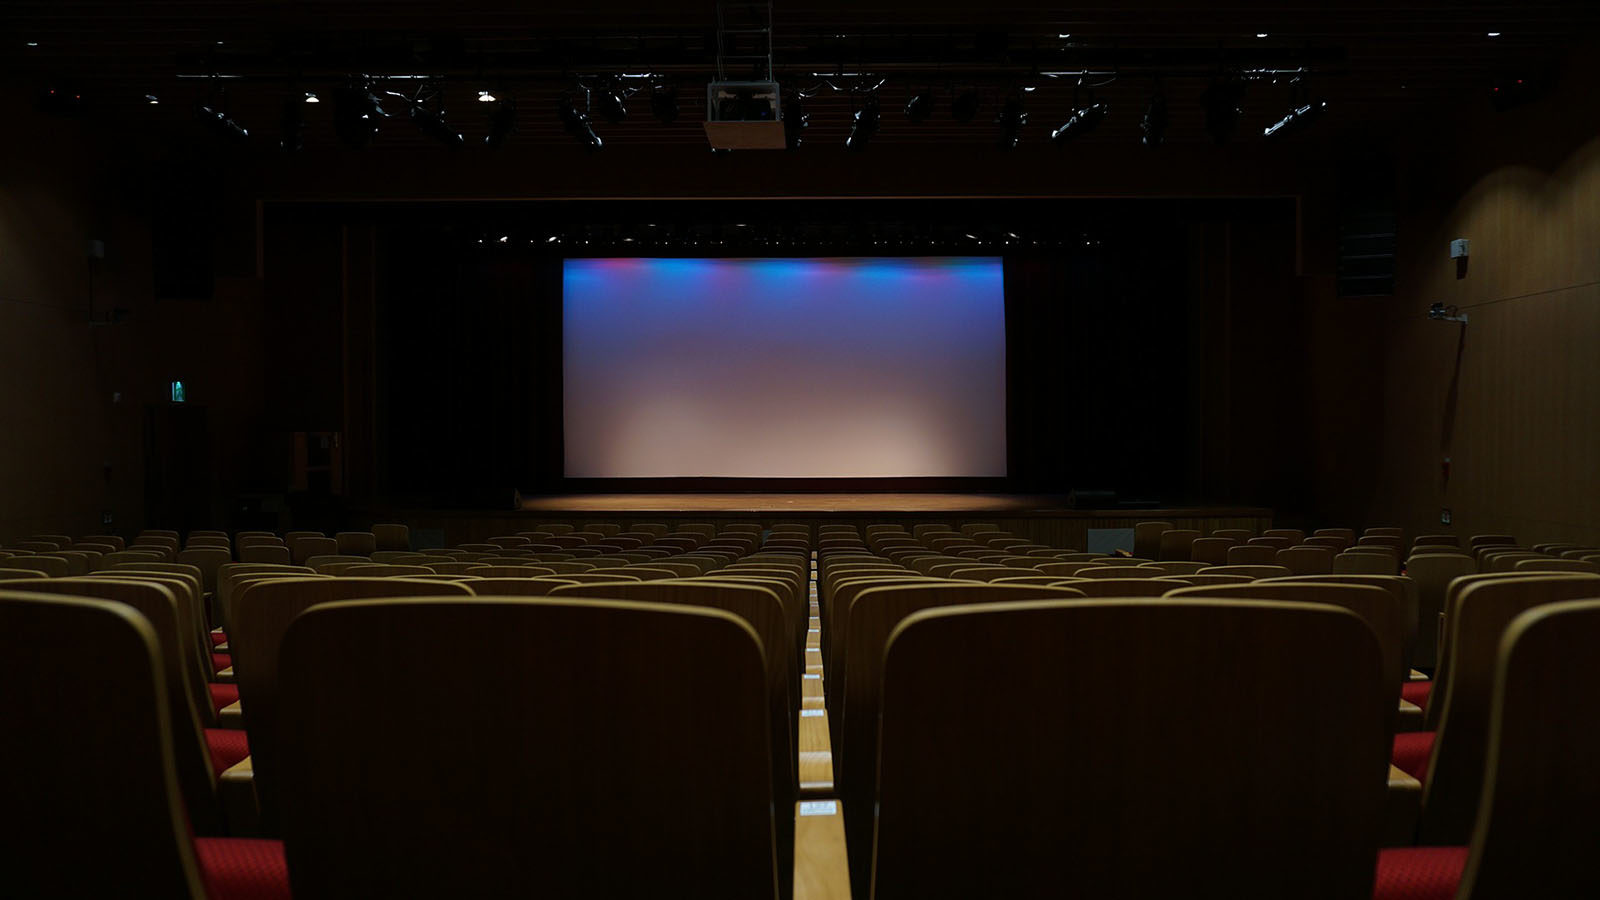 Cinemas, theaters, performing arts venues and libraries